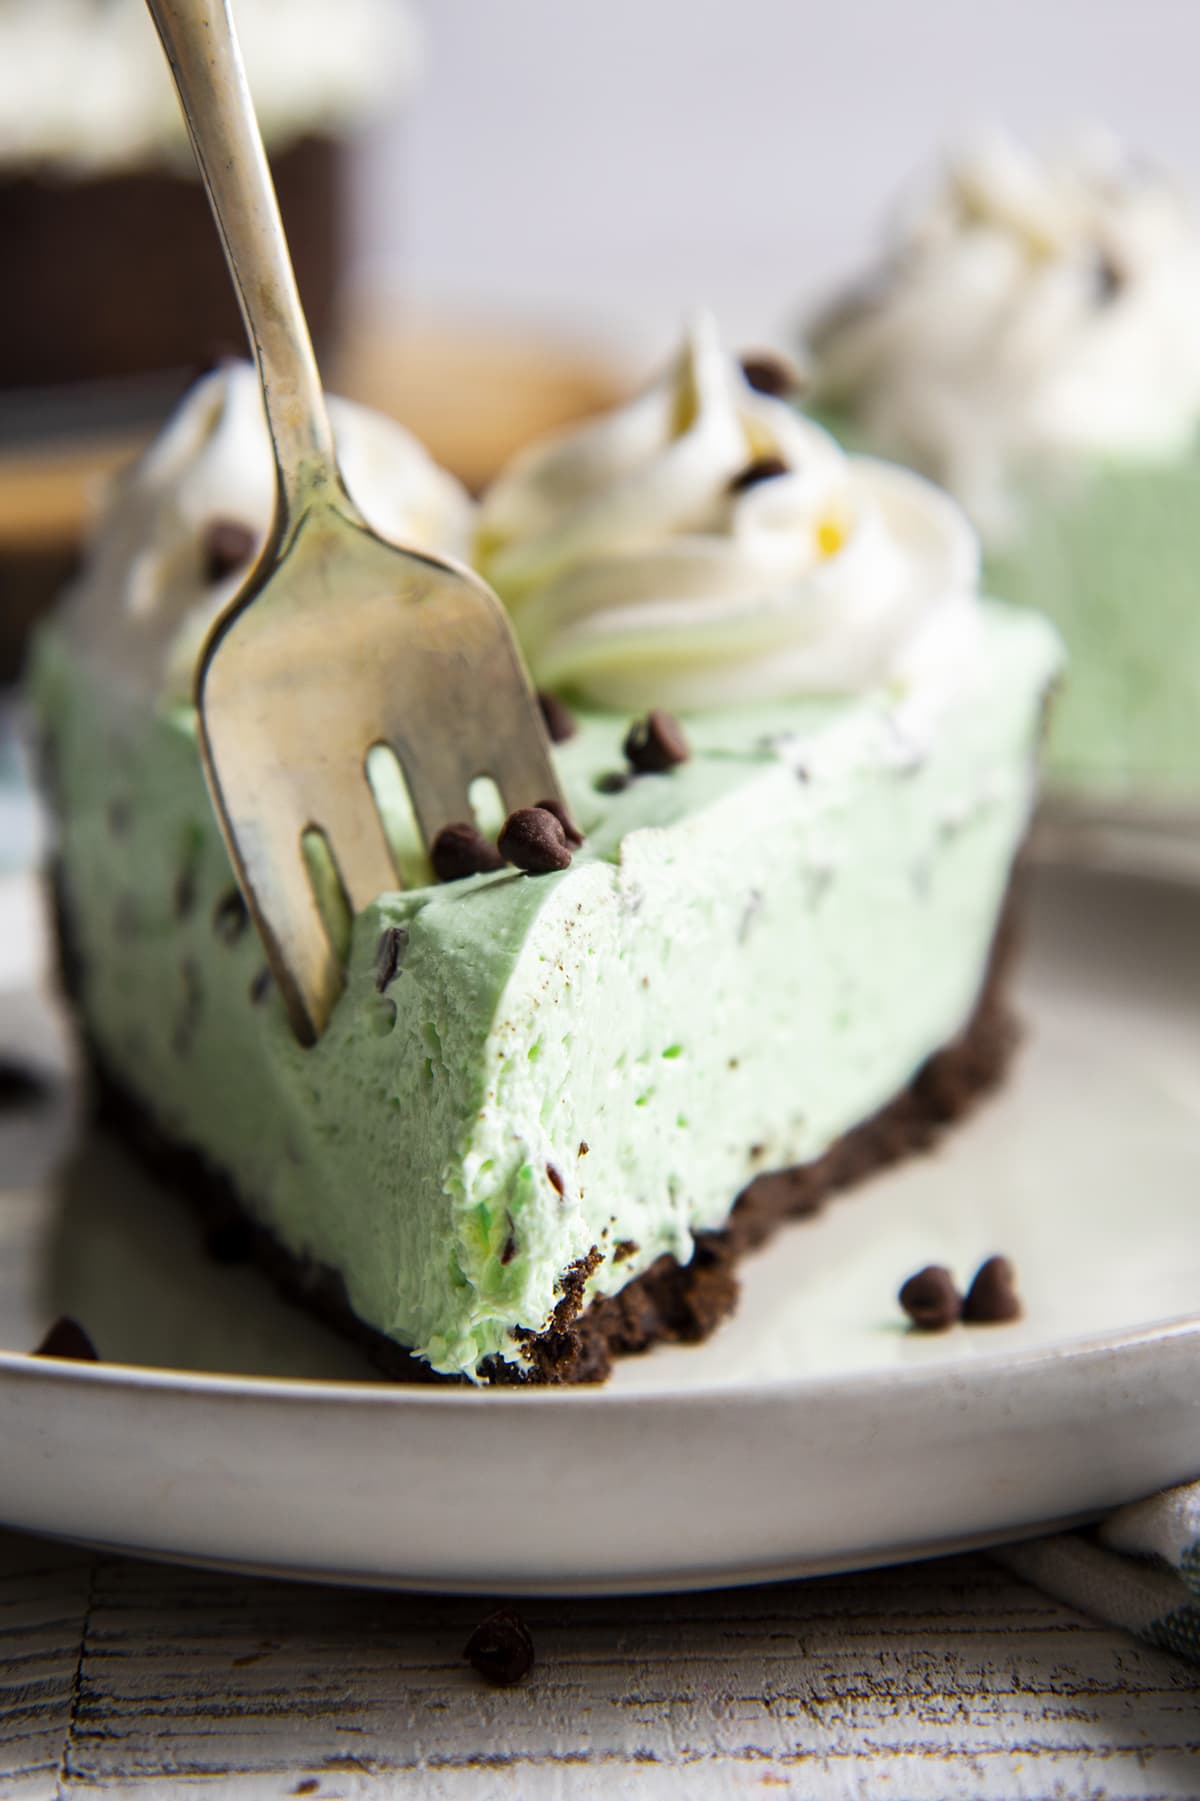 A close up of a piece of mint chocolate cheesecake on a plate.